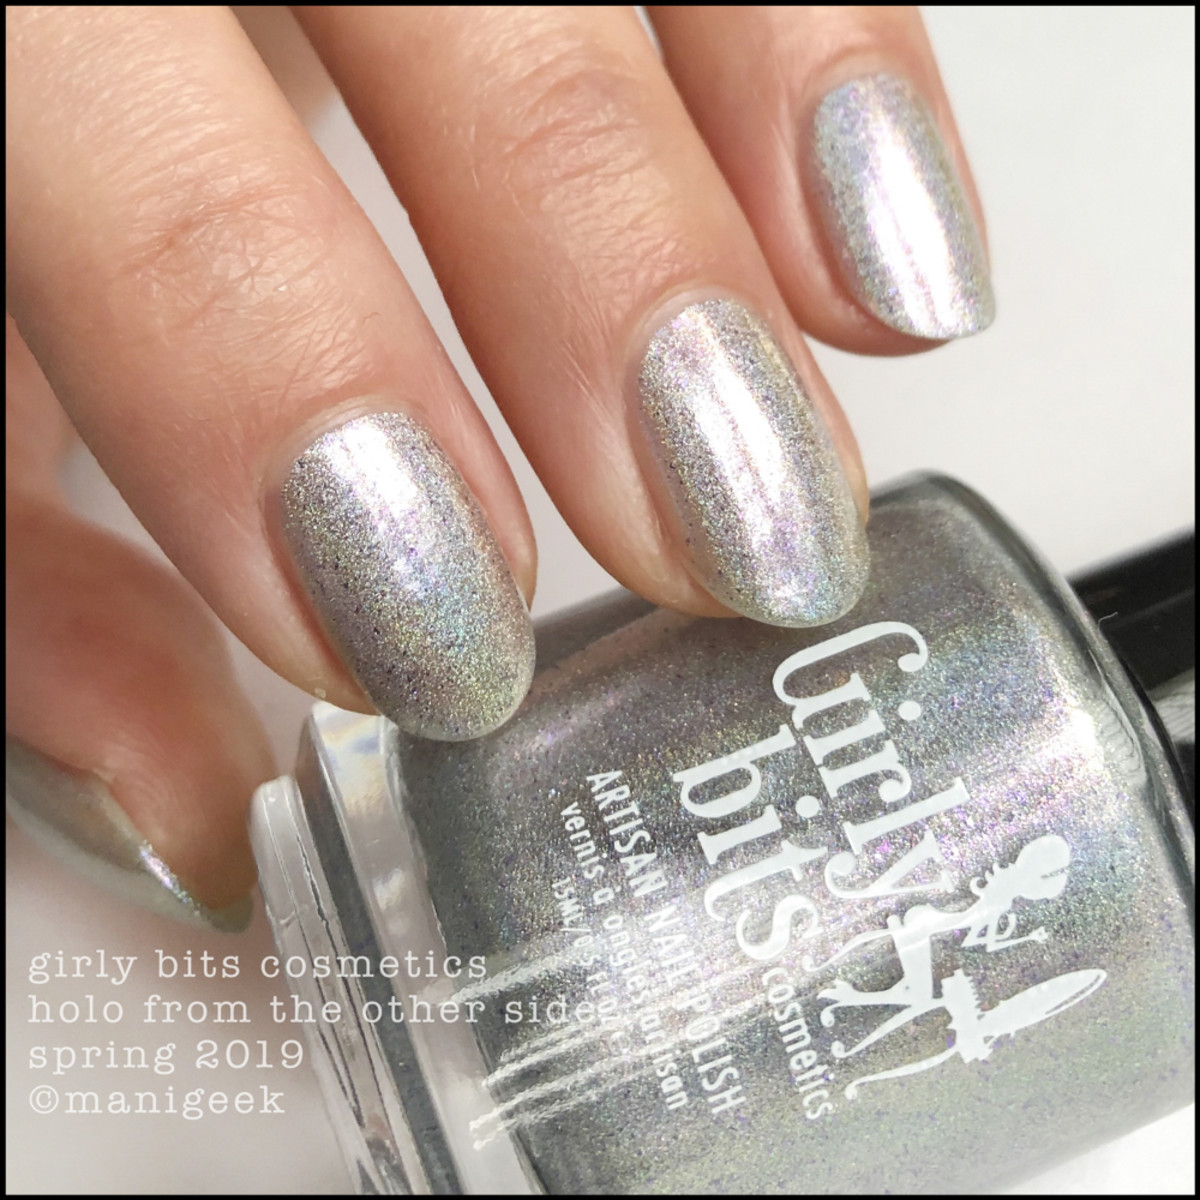 Girly Bits Holo from the Other Side 1 - Girly Bits Cosmetics Spring 2019 Collection